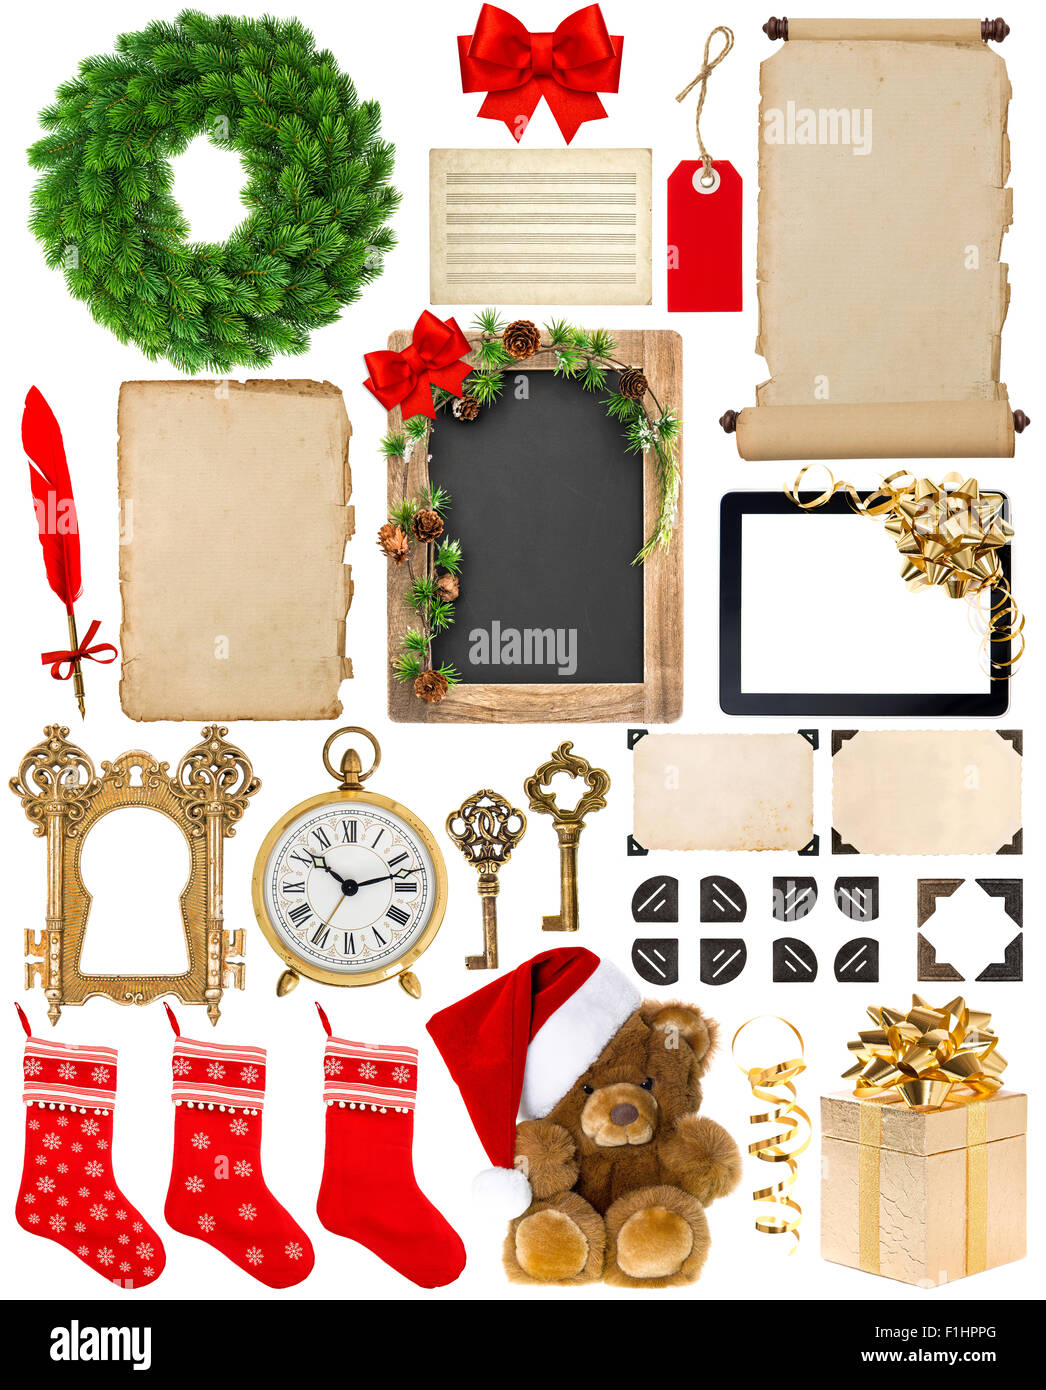 Christmas decorations, ornaments and gifts. Old book pages, paper, wreath, scroll, blackboard, corner and photo frame isolated o Stock Photo